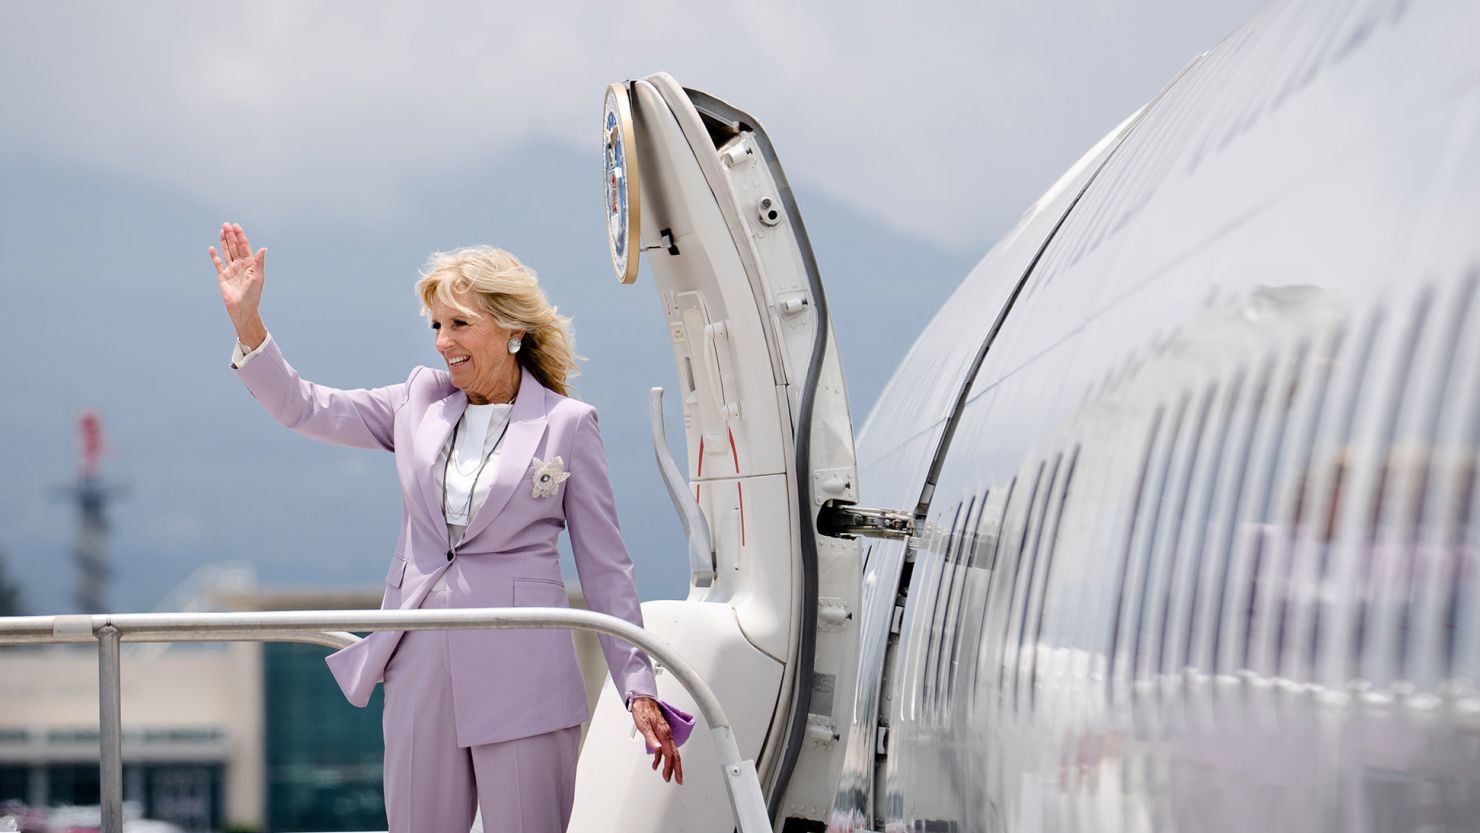 US first lady Jill Biden boards a plane to depart to the United States after her visit to Latin America, in Alajuela, Costa Rica, May 23, 2022. 